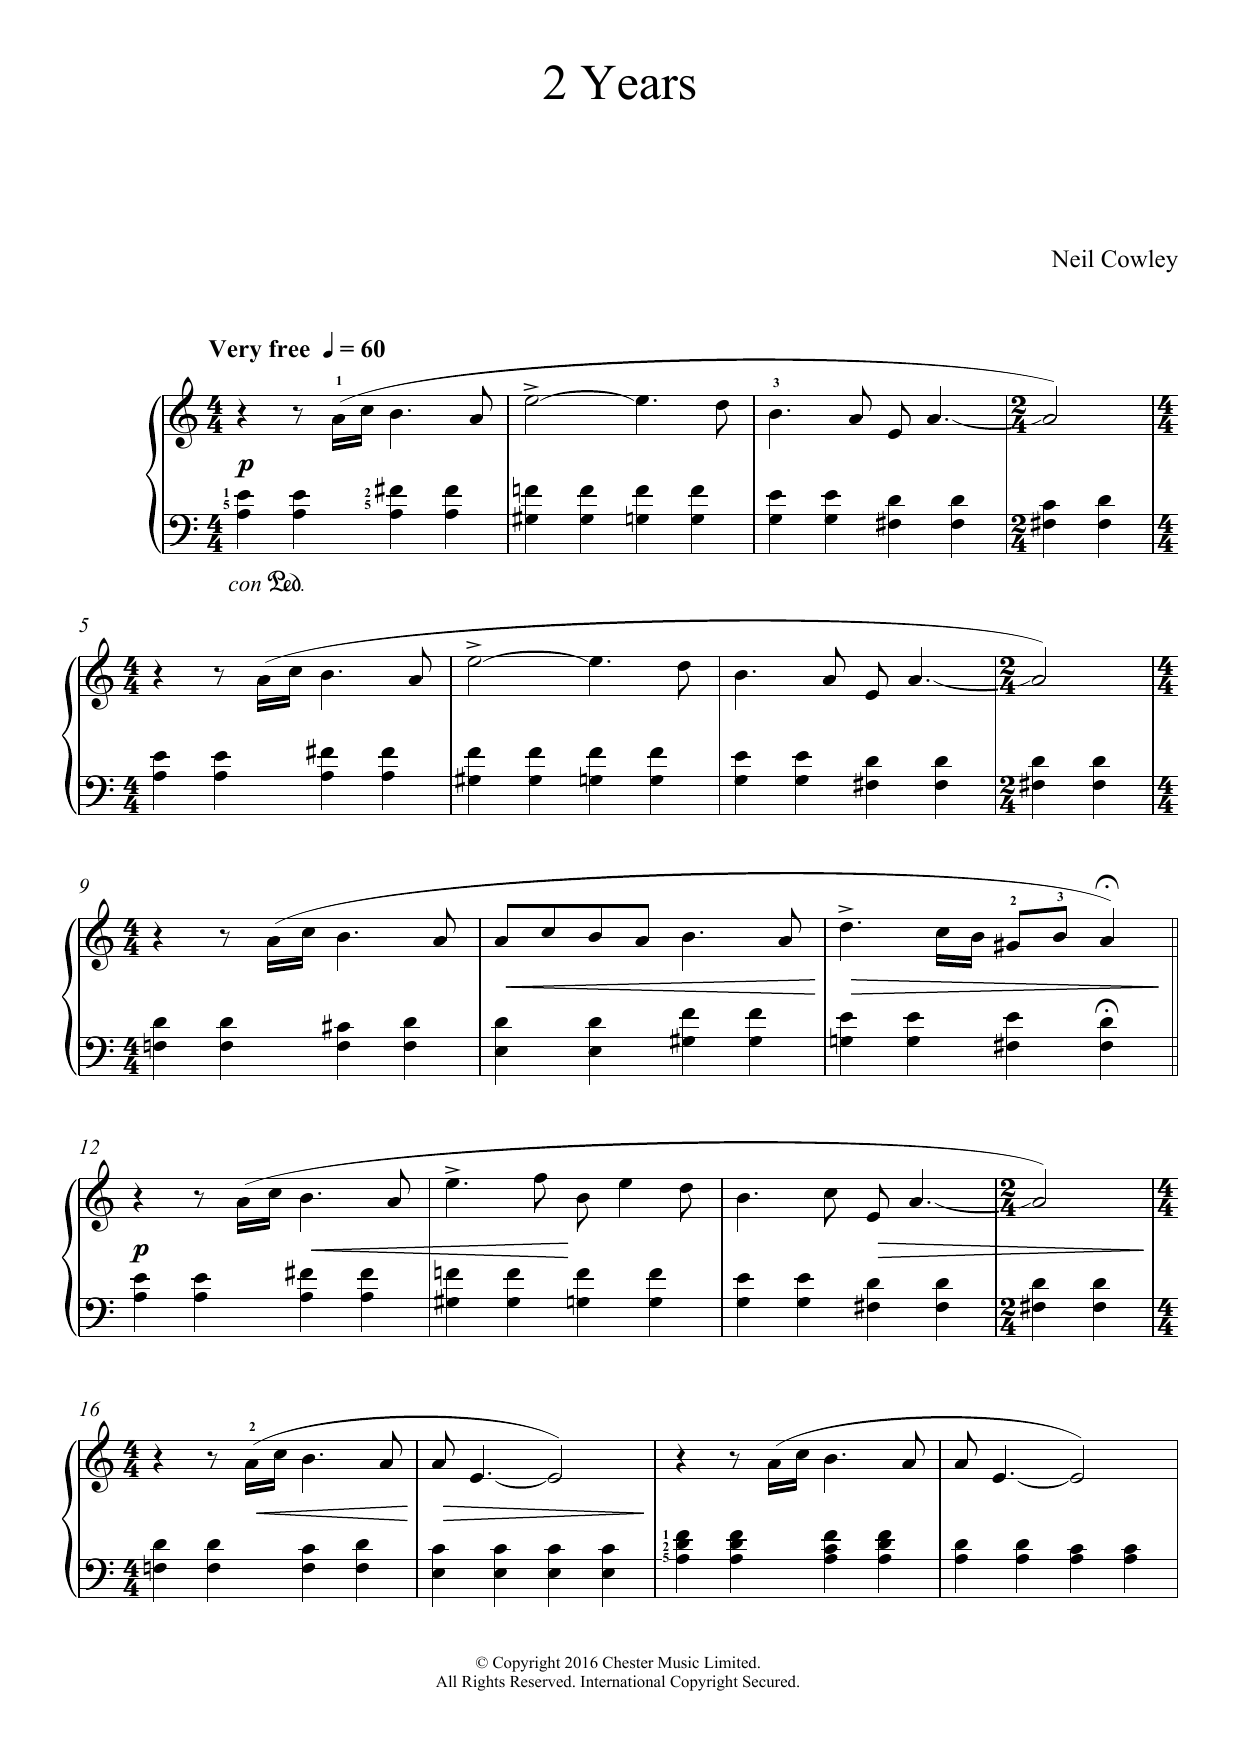 Download Neil Cowley 2 Years Sheet Music